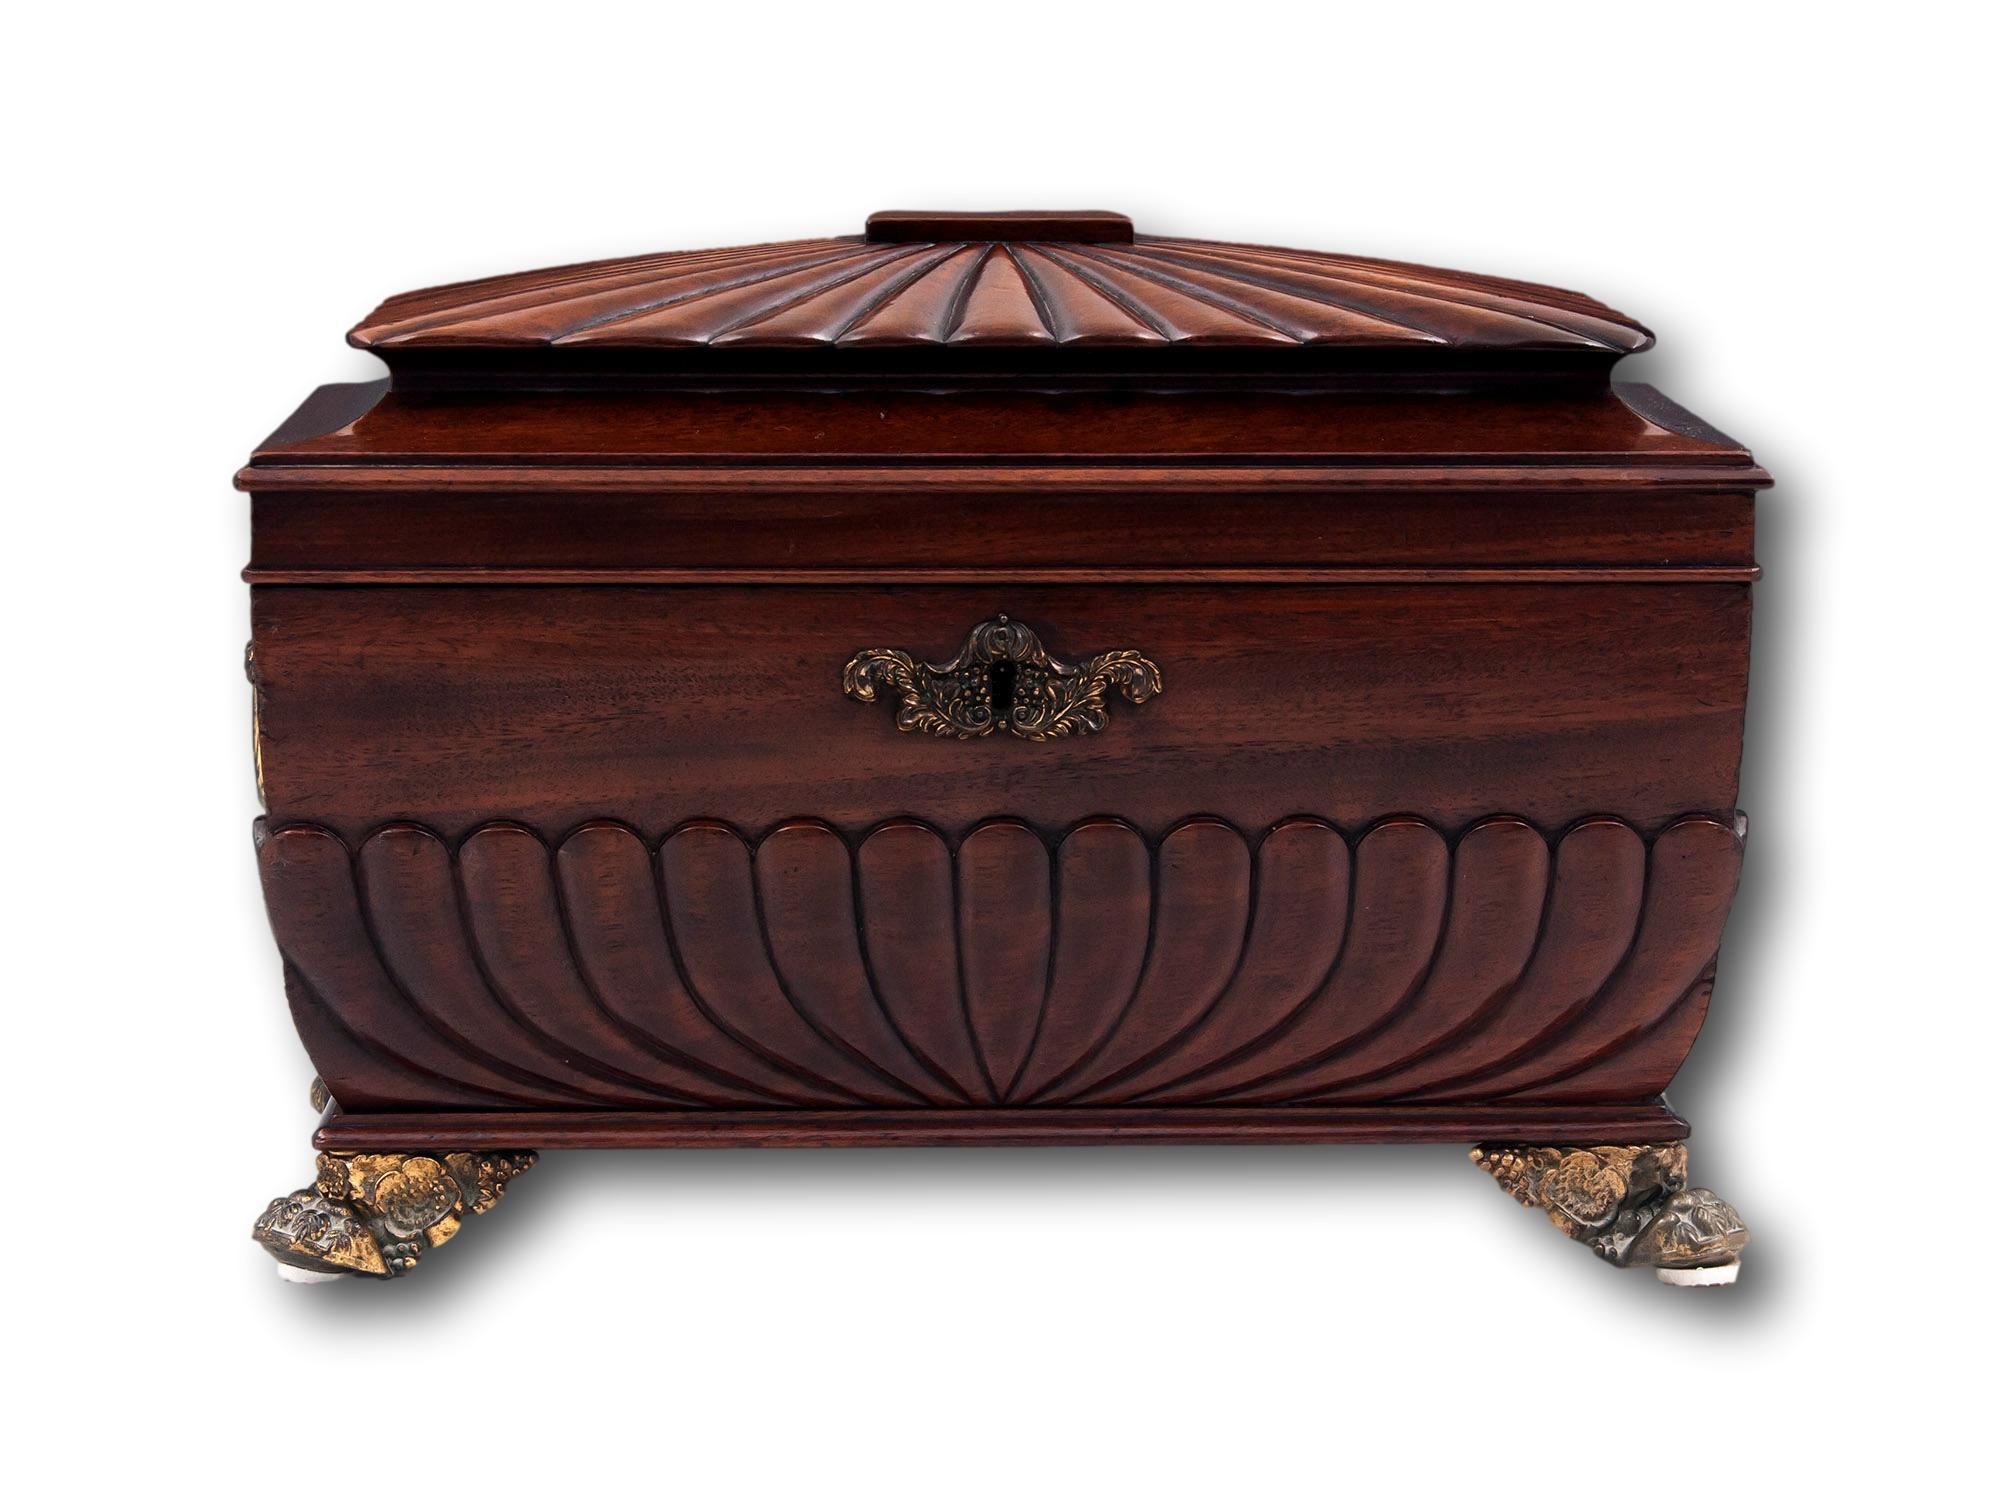 With Twin Caddies & Hand Cut Glass Sugar Bowl

From our Tea Caddy collection, we are delighted to offer this rare Regency Cuban Mahogany Tea Chest by Robert Wright. The Tea Chest of sarcophagus shape with a pagoda top and subtle bombe-shaped body